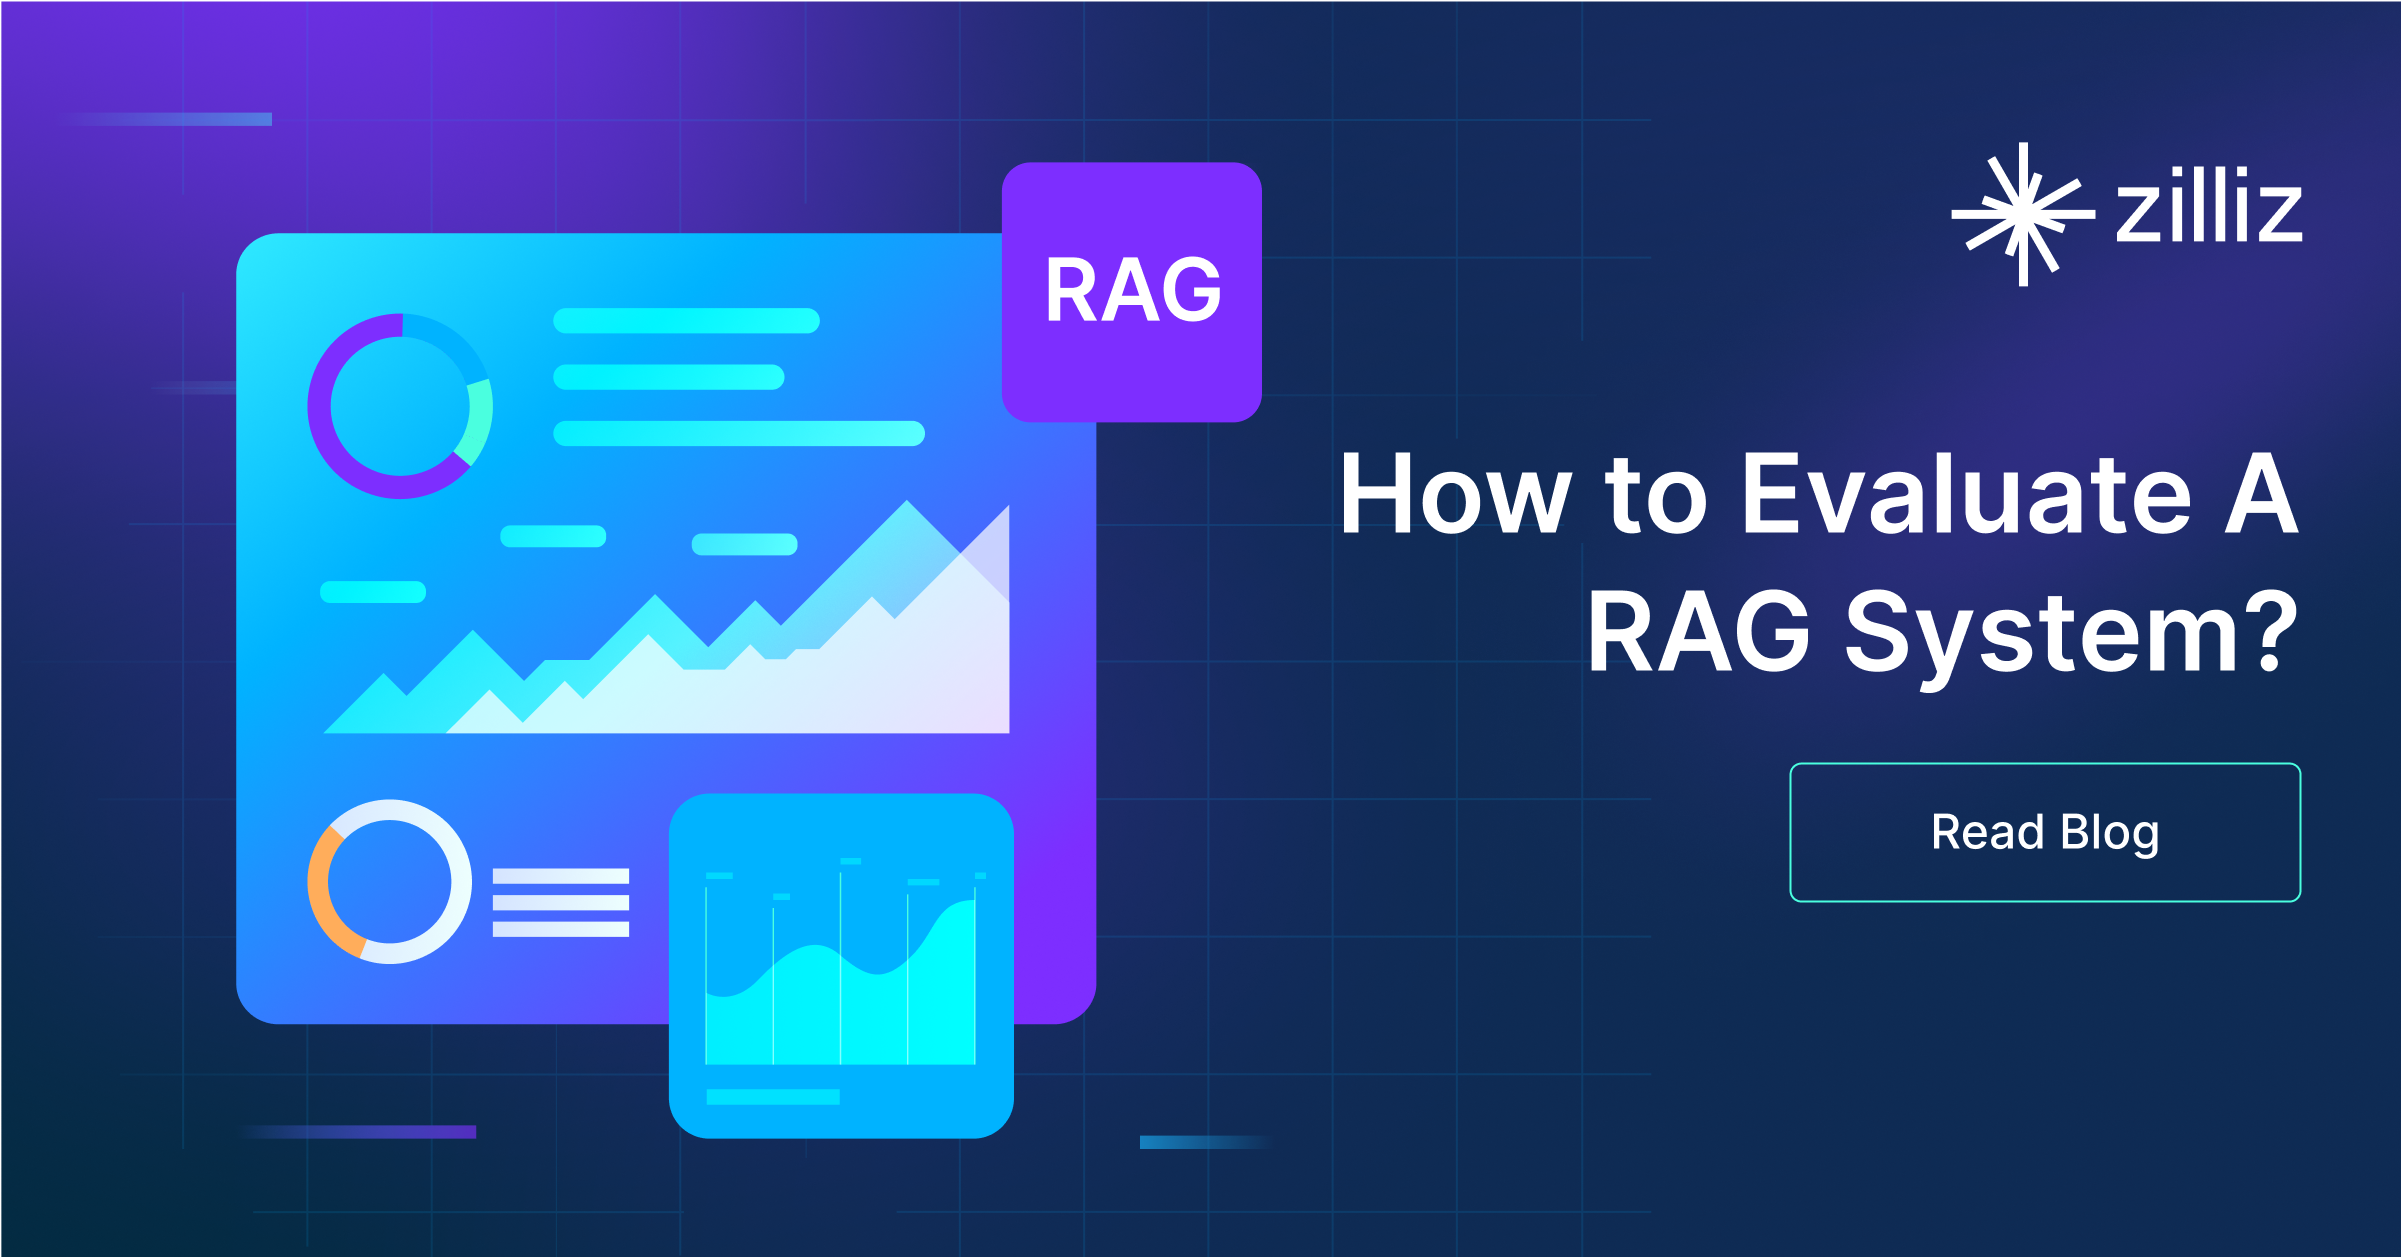 https://assets.zilliz.com/Dec_27_How_to_Evaluate_An_RAG_System_1_c62bfb2f56.png